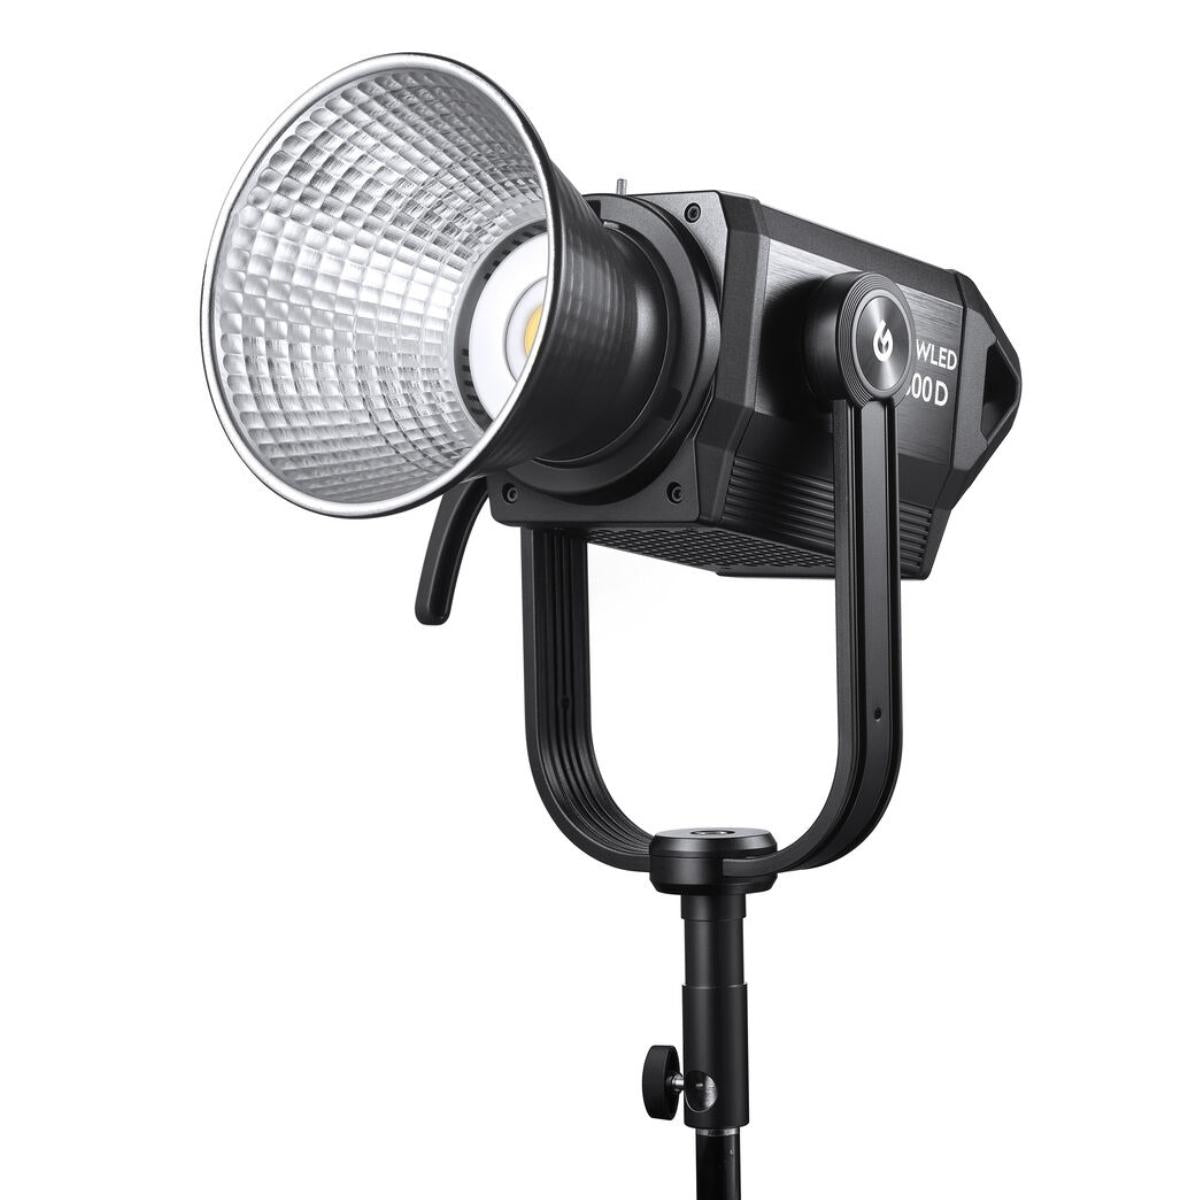 Godox KNOWLED 300W Bi-Color / Daylight LED Studio Light with Effects, 2800-6500K / 5600K Color Temperature, 3-Way Control Method and Bowens Mount | M300BI, M300D